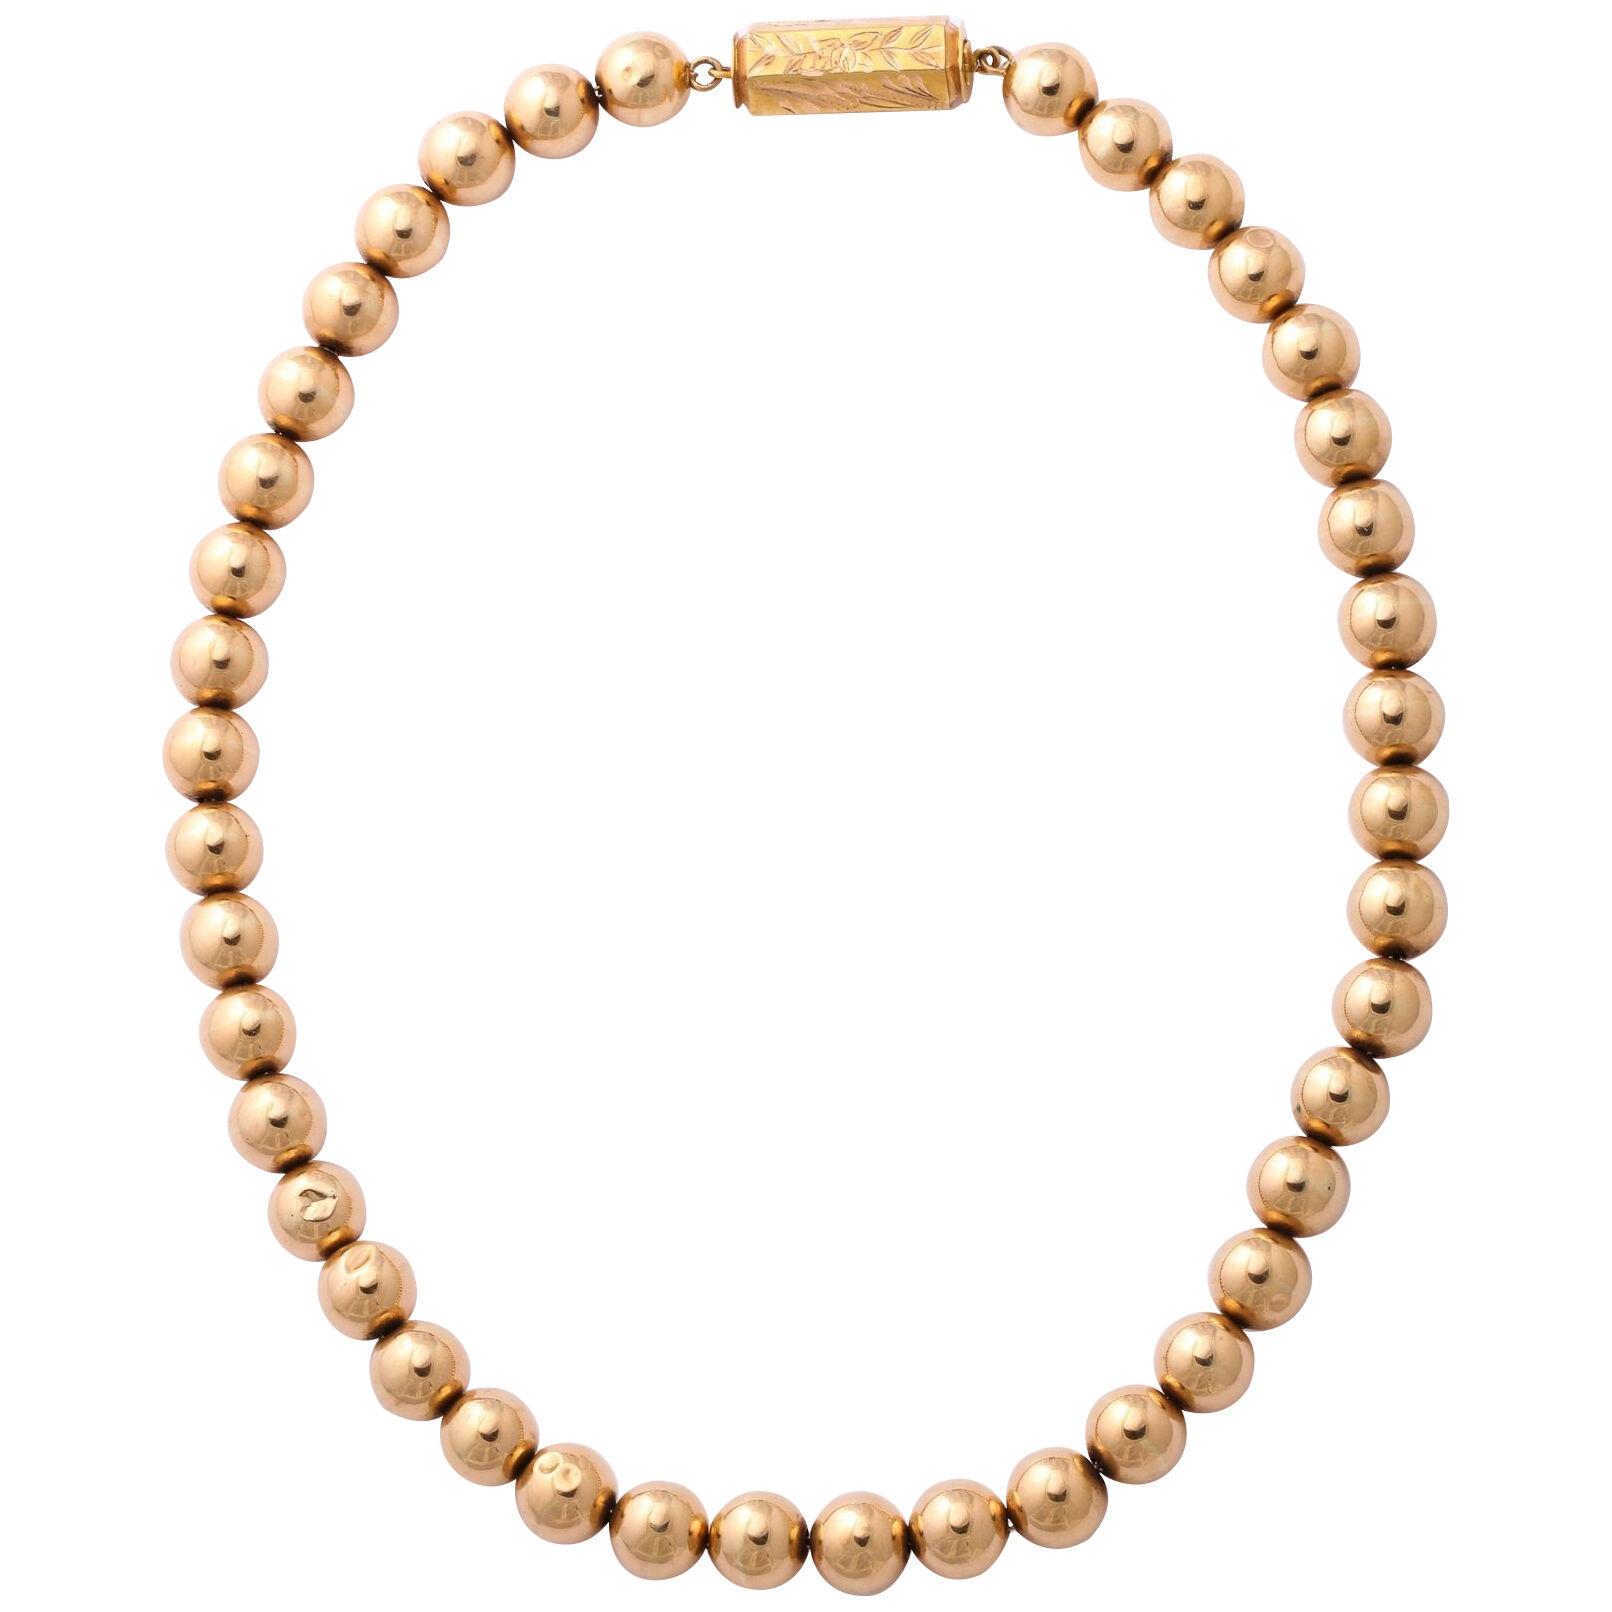 Antique French Gold Bead Necklace